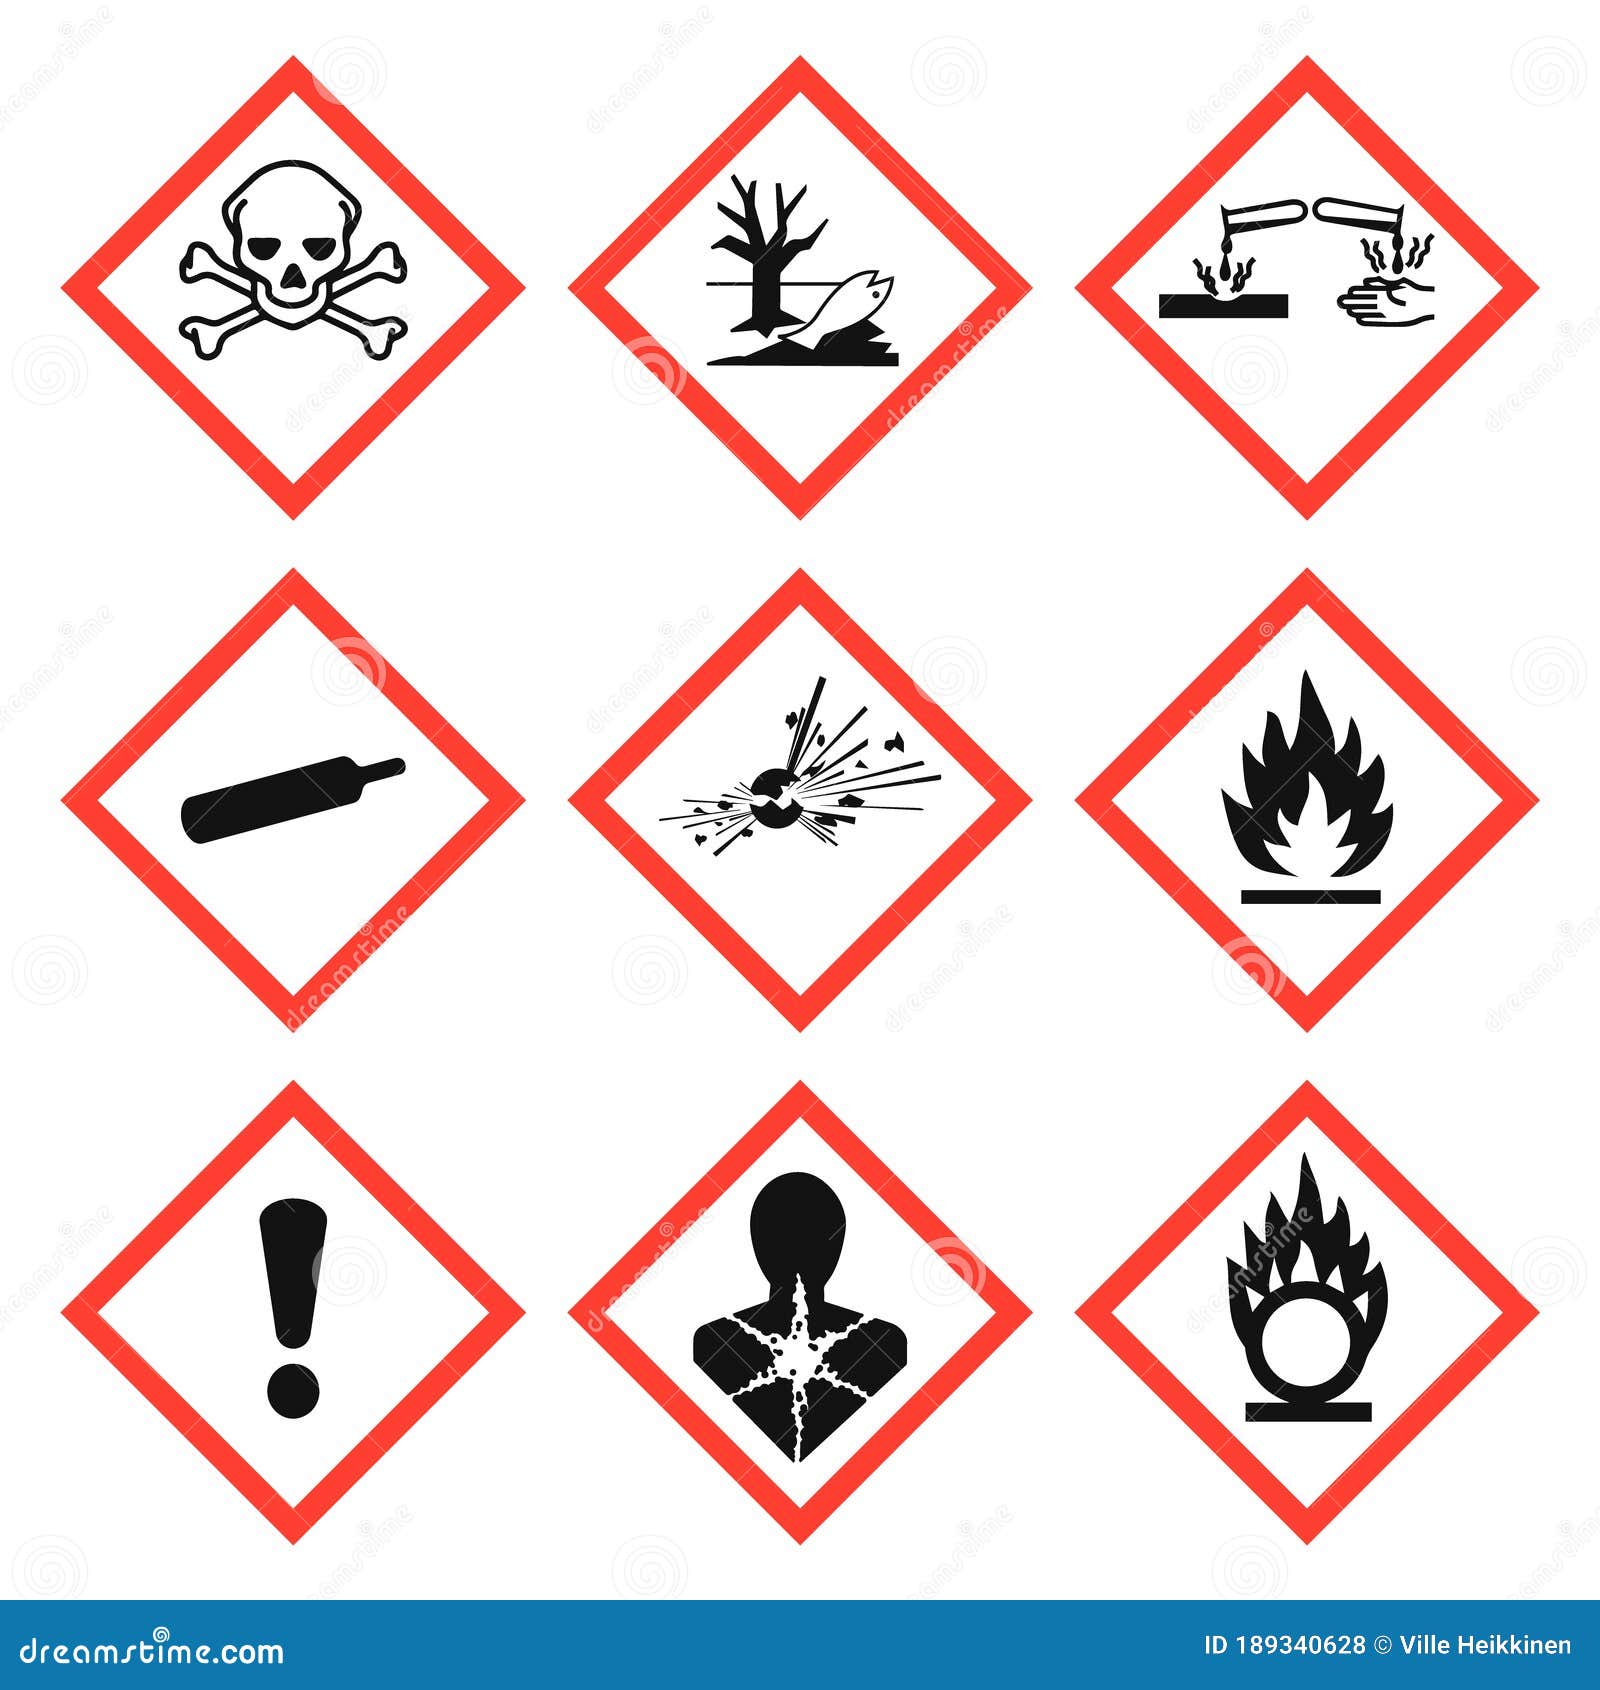 Ghs Pictogram Hazard Sign Set Isolated On White Background Dangerous Hazard Symbol Icon Collection Vector Illustration Image Stock Vector Illustration Of Black Chemical 189340628